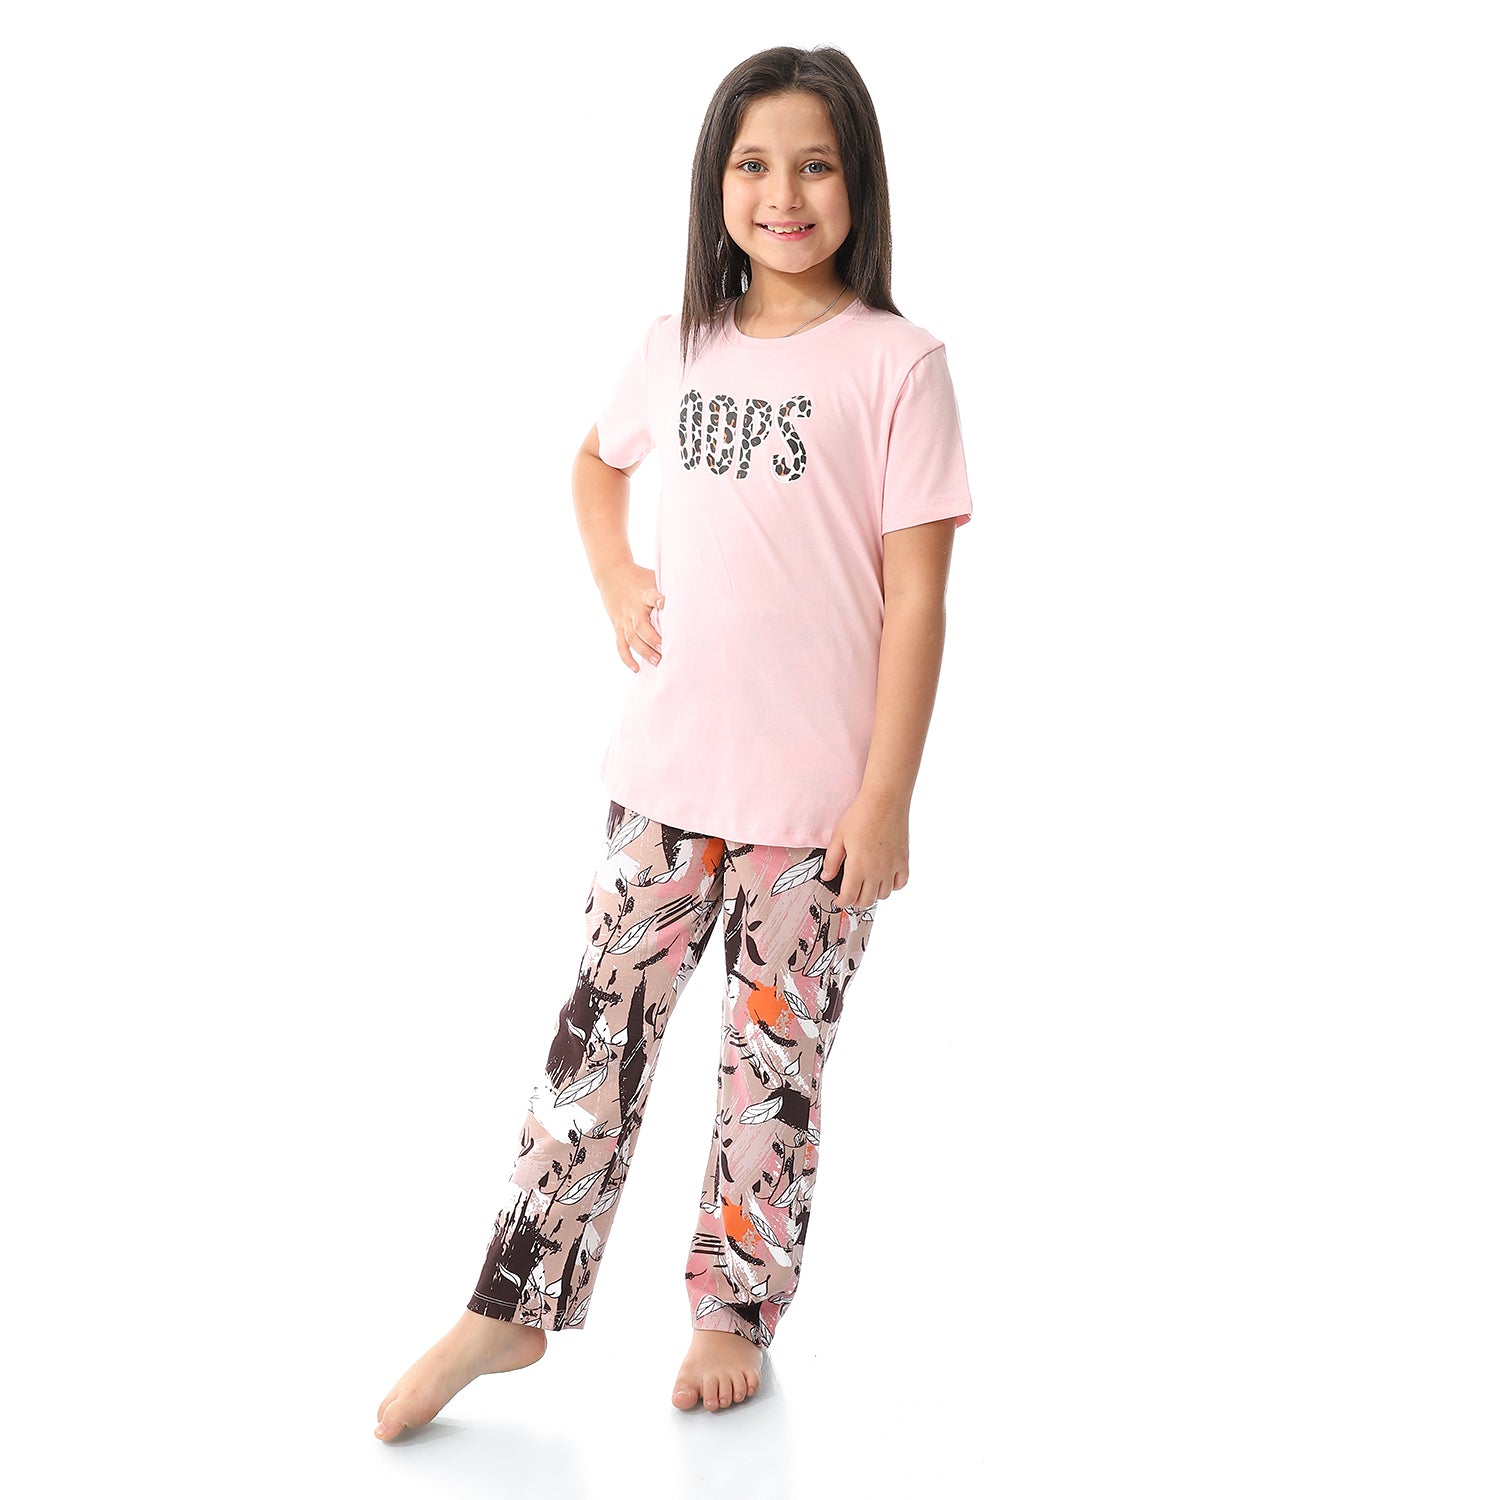 Girls OOPS Cotton Tee & Patterned Pants Pajama Set - Multicolour